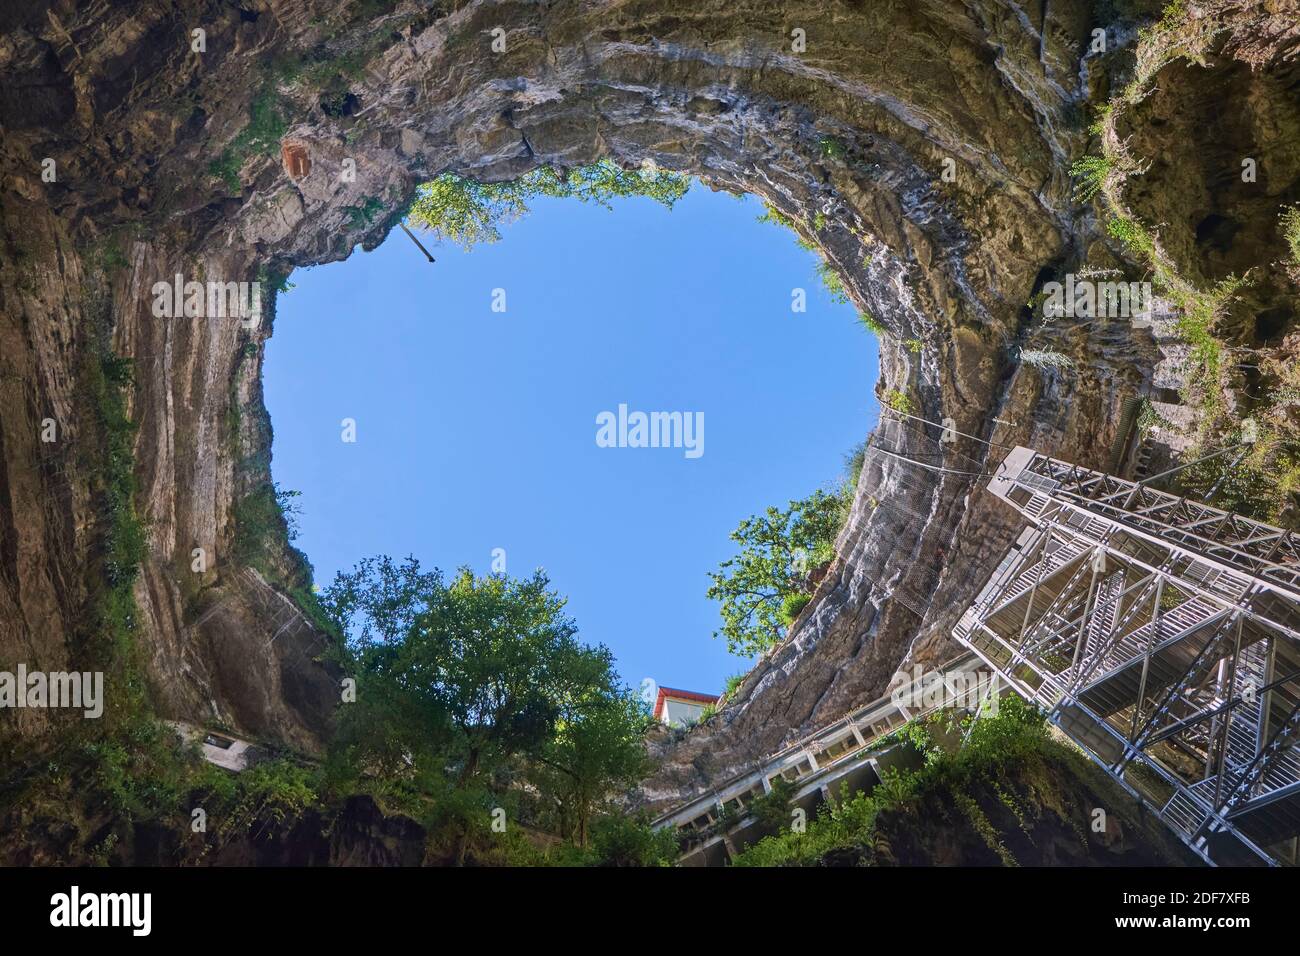 France, Lot, Causses du Quercy Regional Natural Park, Padirac, Padirac chasm, view from below Stock Photo